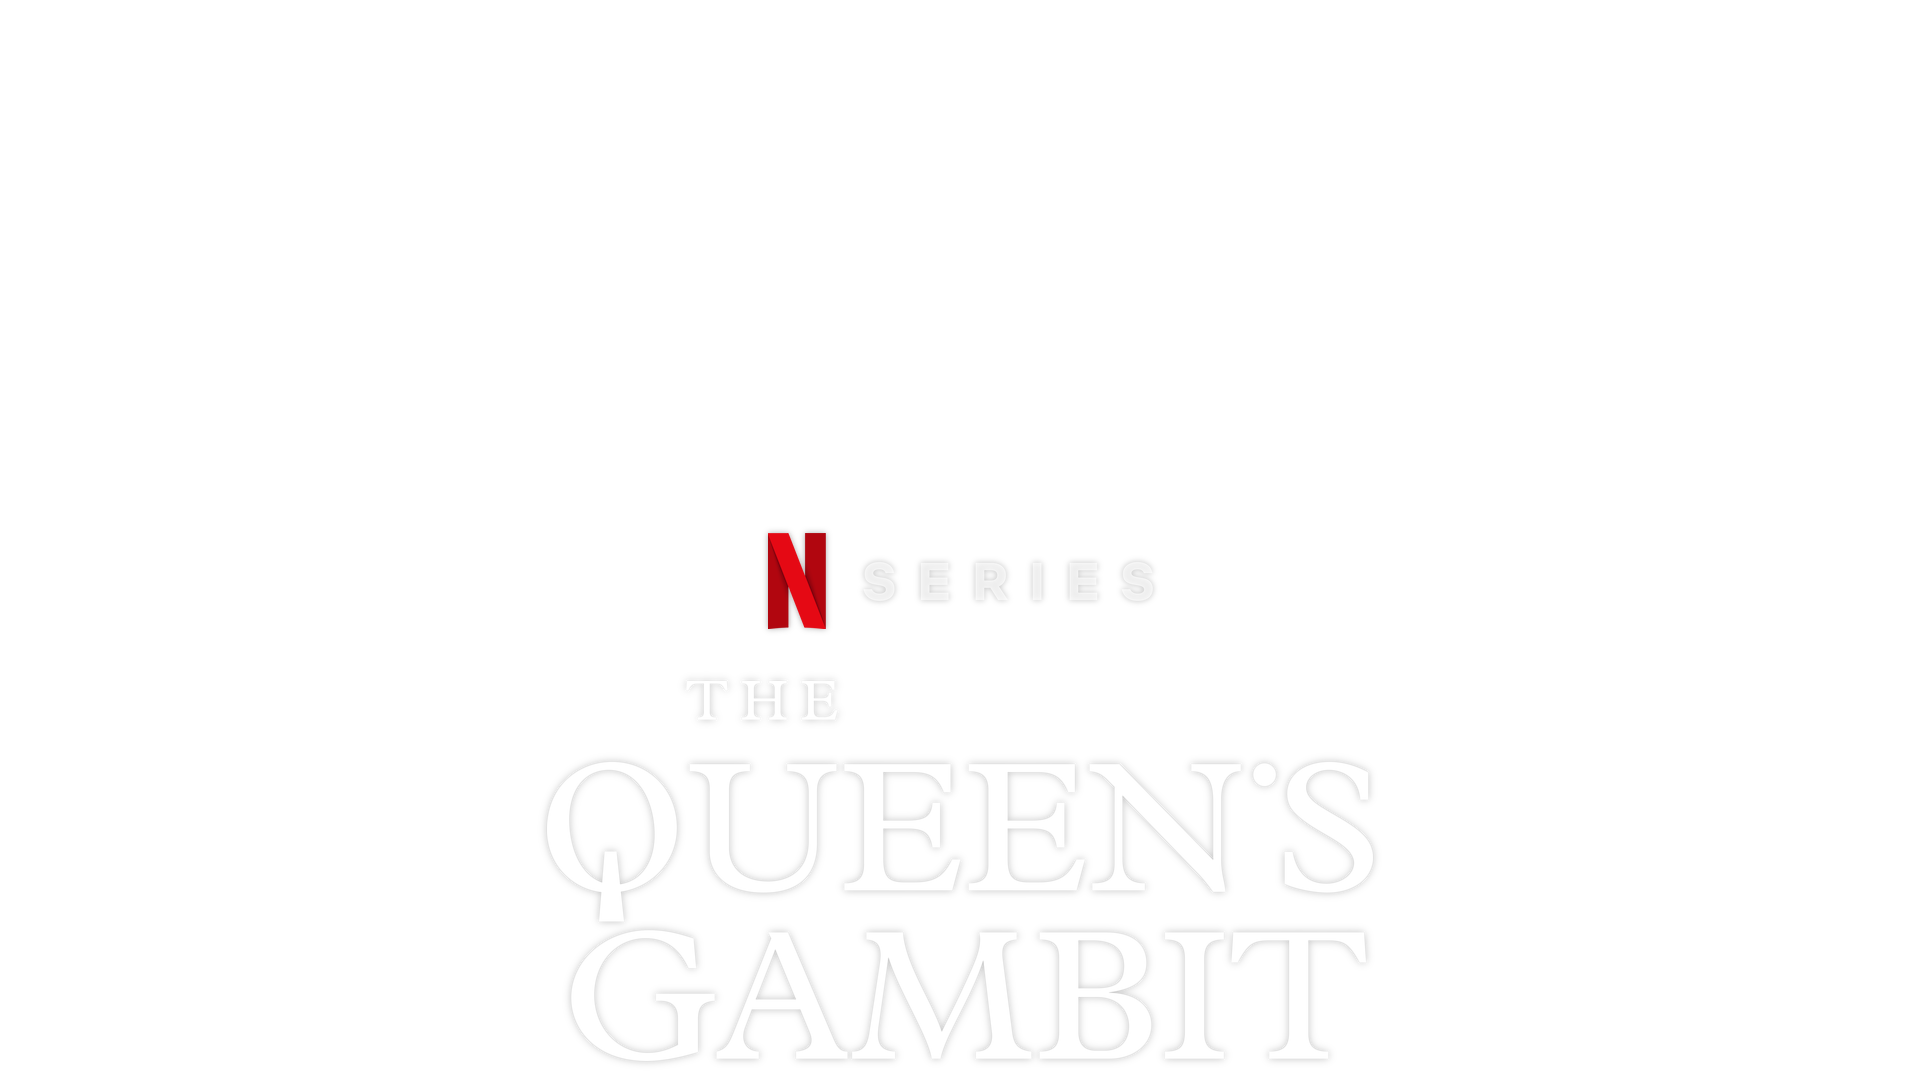 The Queen's Gambit' Cast Guide: Who's Who in Netflix's Chess Drama